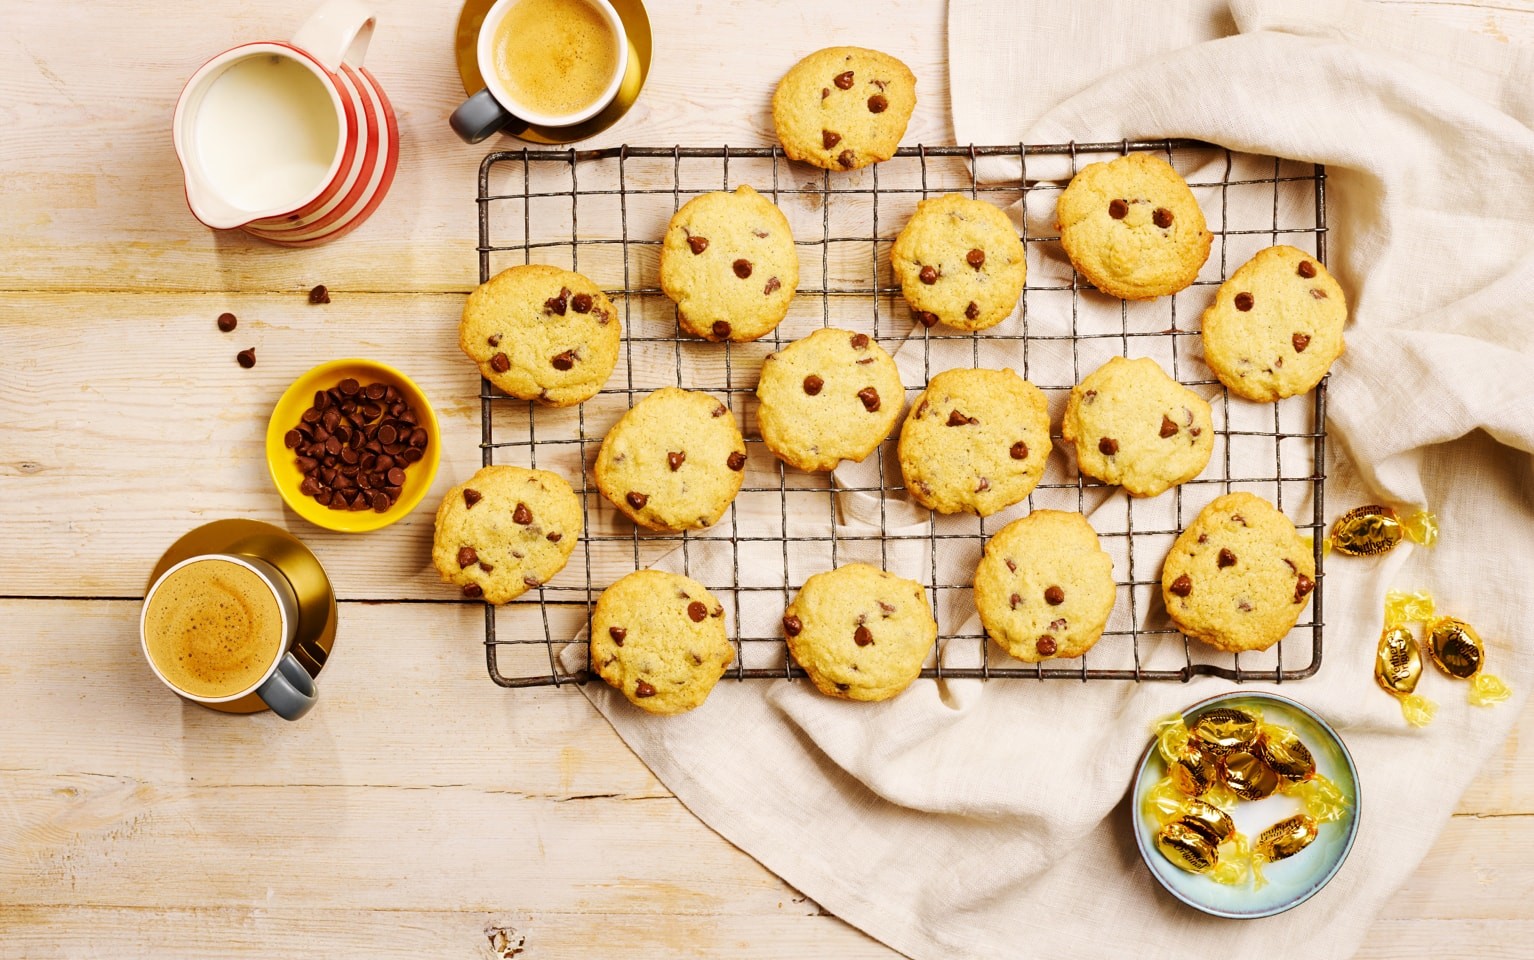 Salted Caramel Choc Chip Cookies